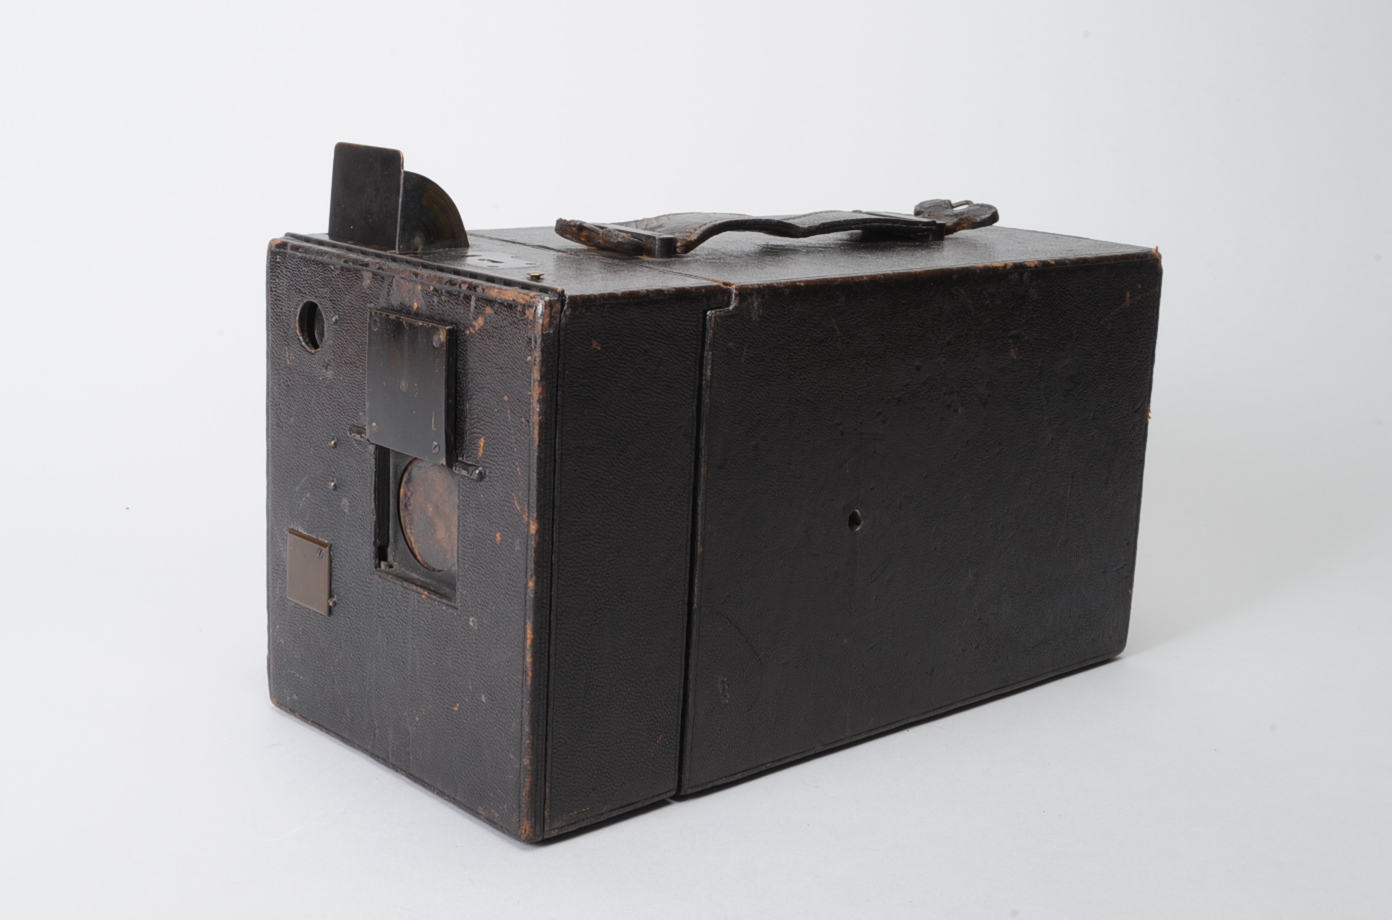 A Newman and Guardia Model B Quarter Plate Camera, serial no B322, 4¼ x 3¼", with Goerz Double